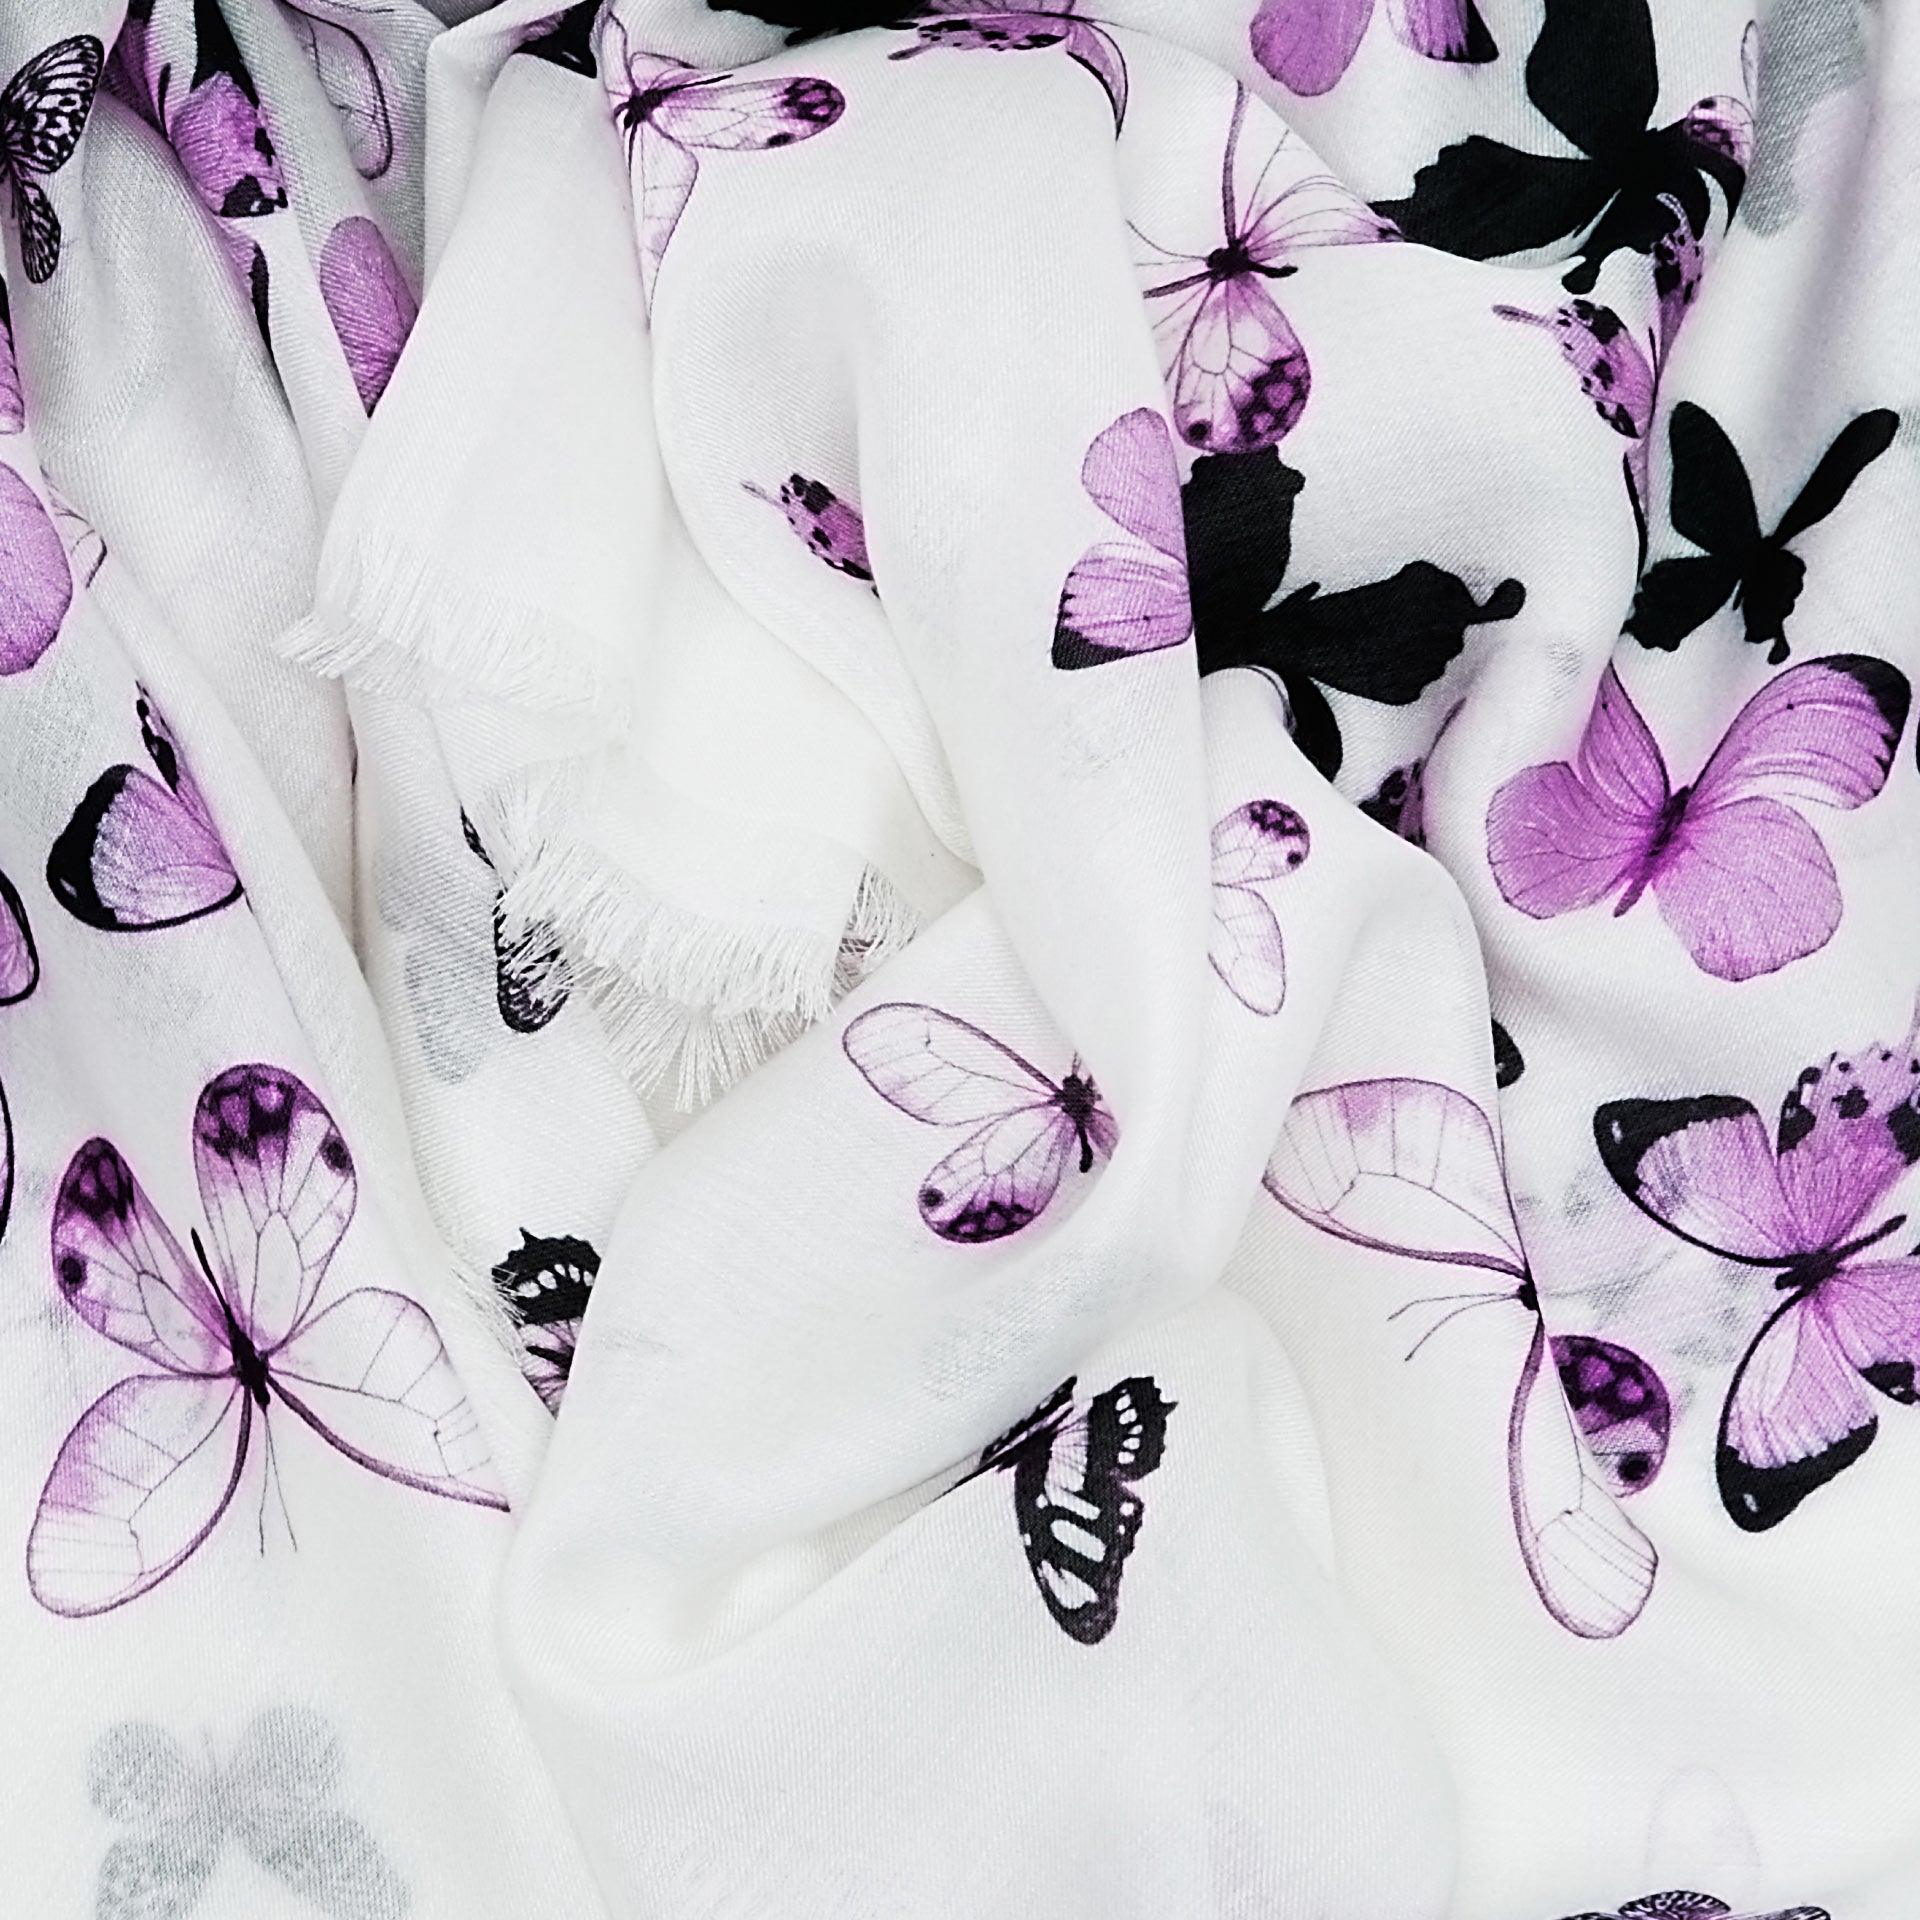 Off White Butterflies Cashmere Blend Scarf - Fusion of London's design and Italian craftsmanship, a luxurious gift choice.